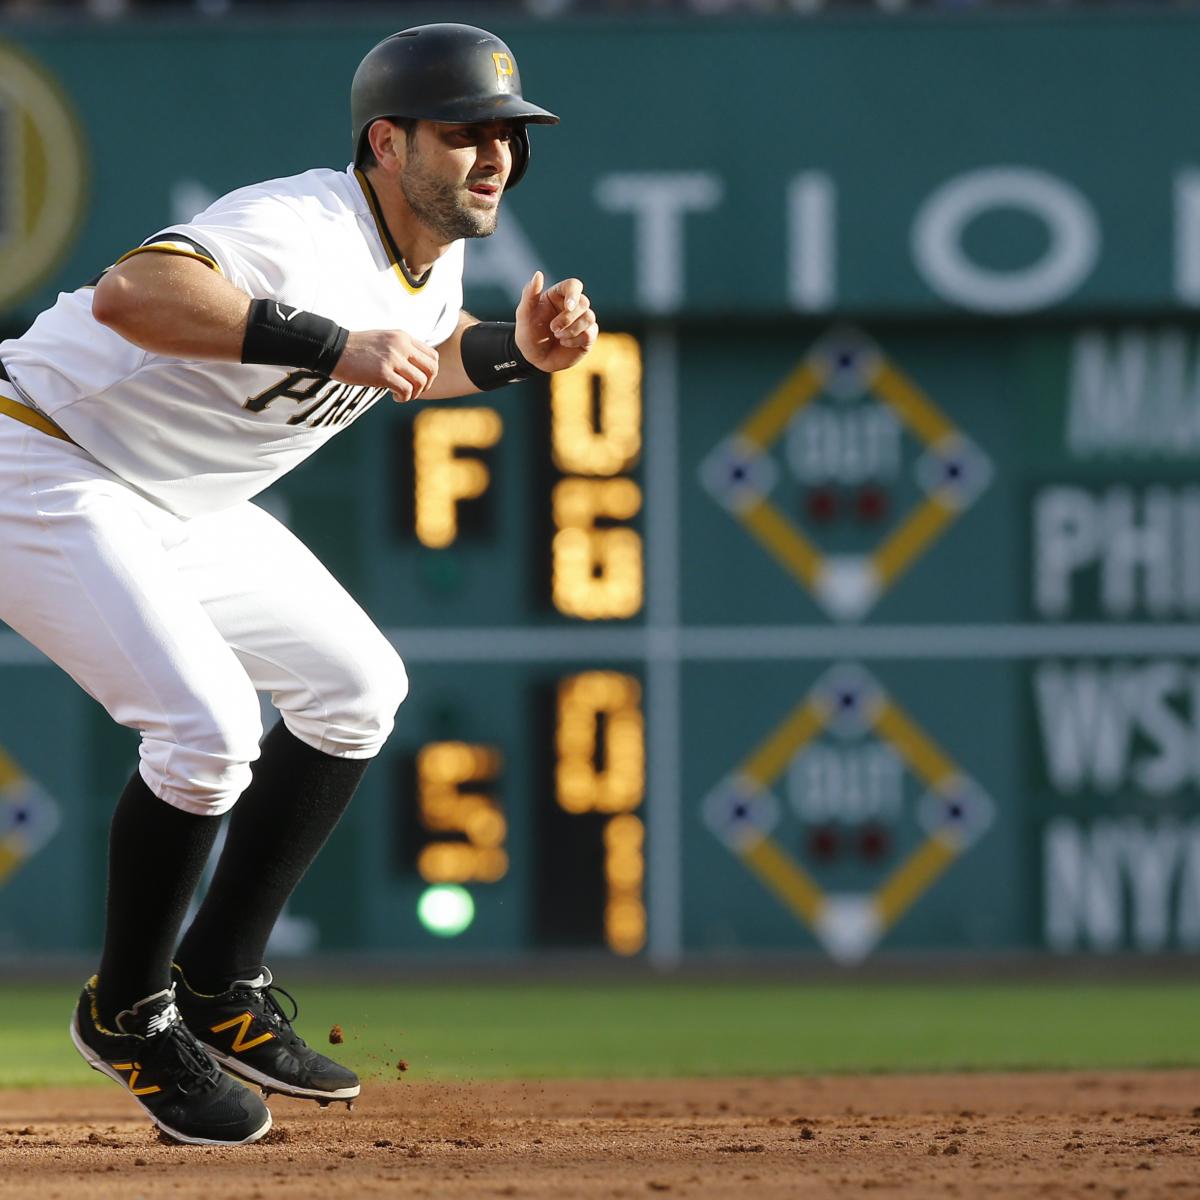 The WTW: Francisco Cervelli's sexy, swashbuckling style on the bases  provides a boost - The Athletic